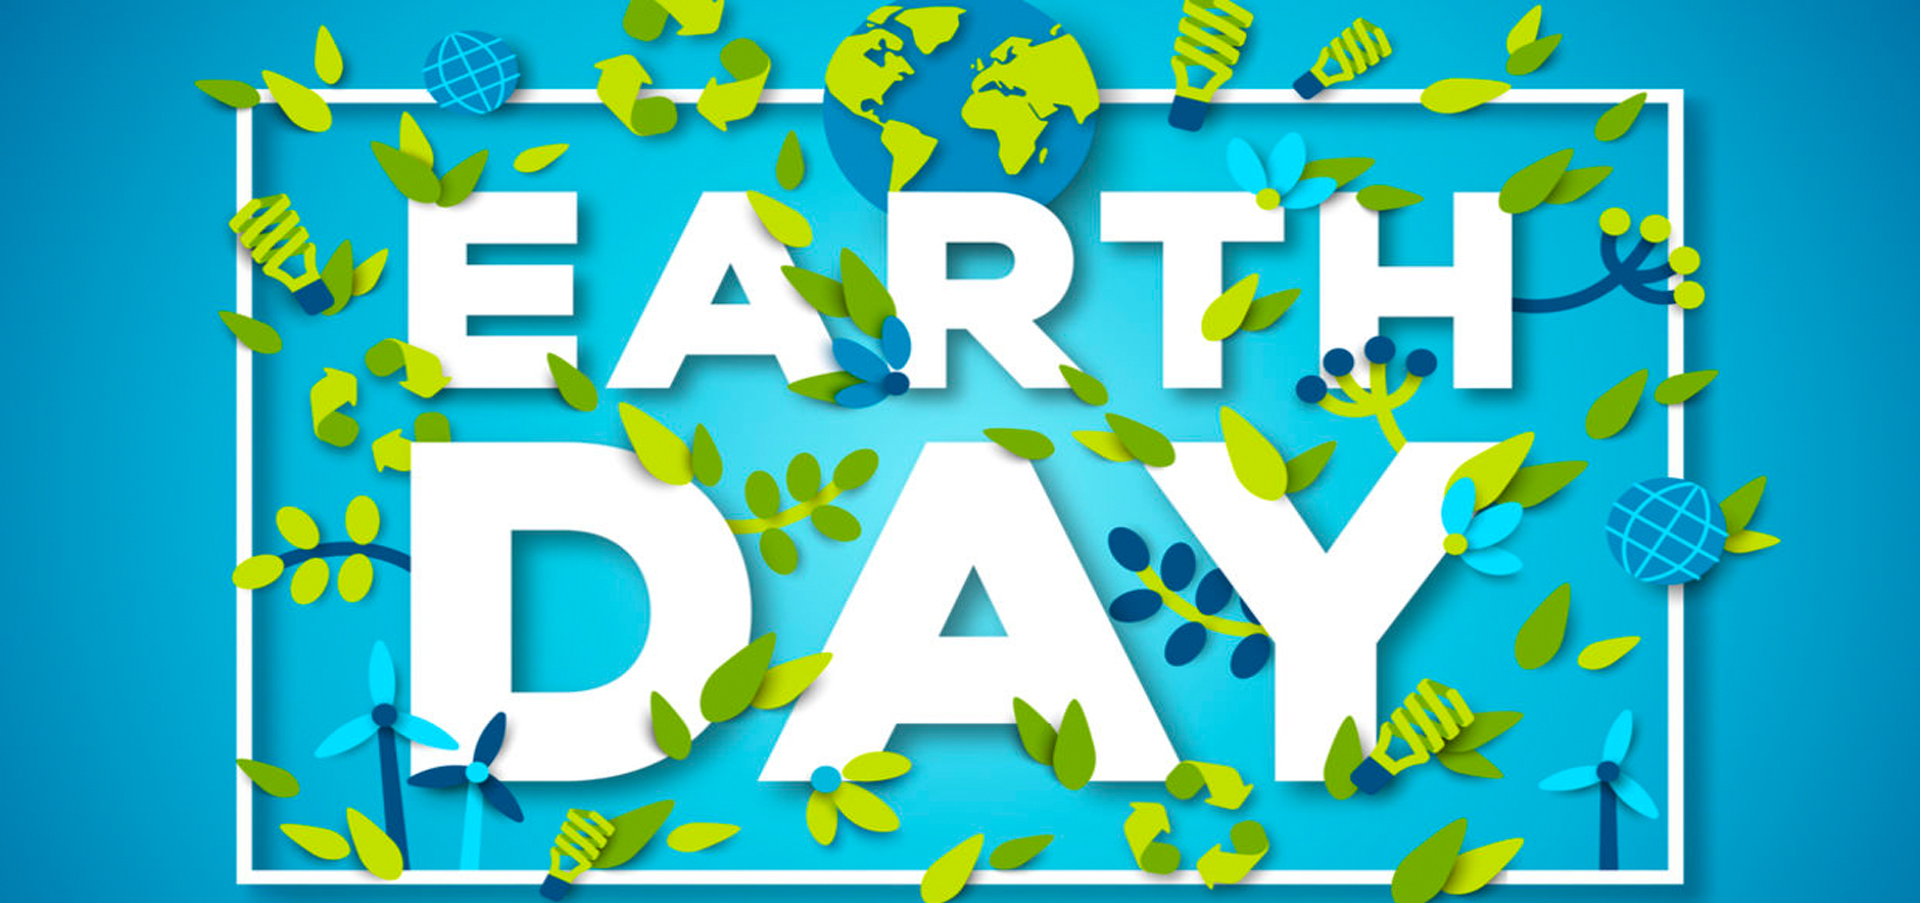 Green Events Guide for the 2020 Earth Day